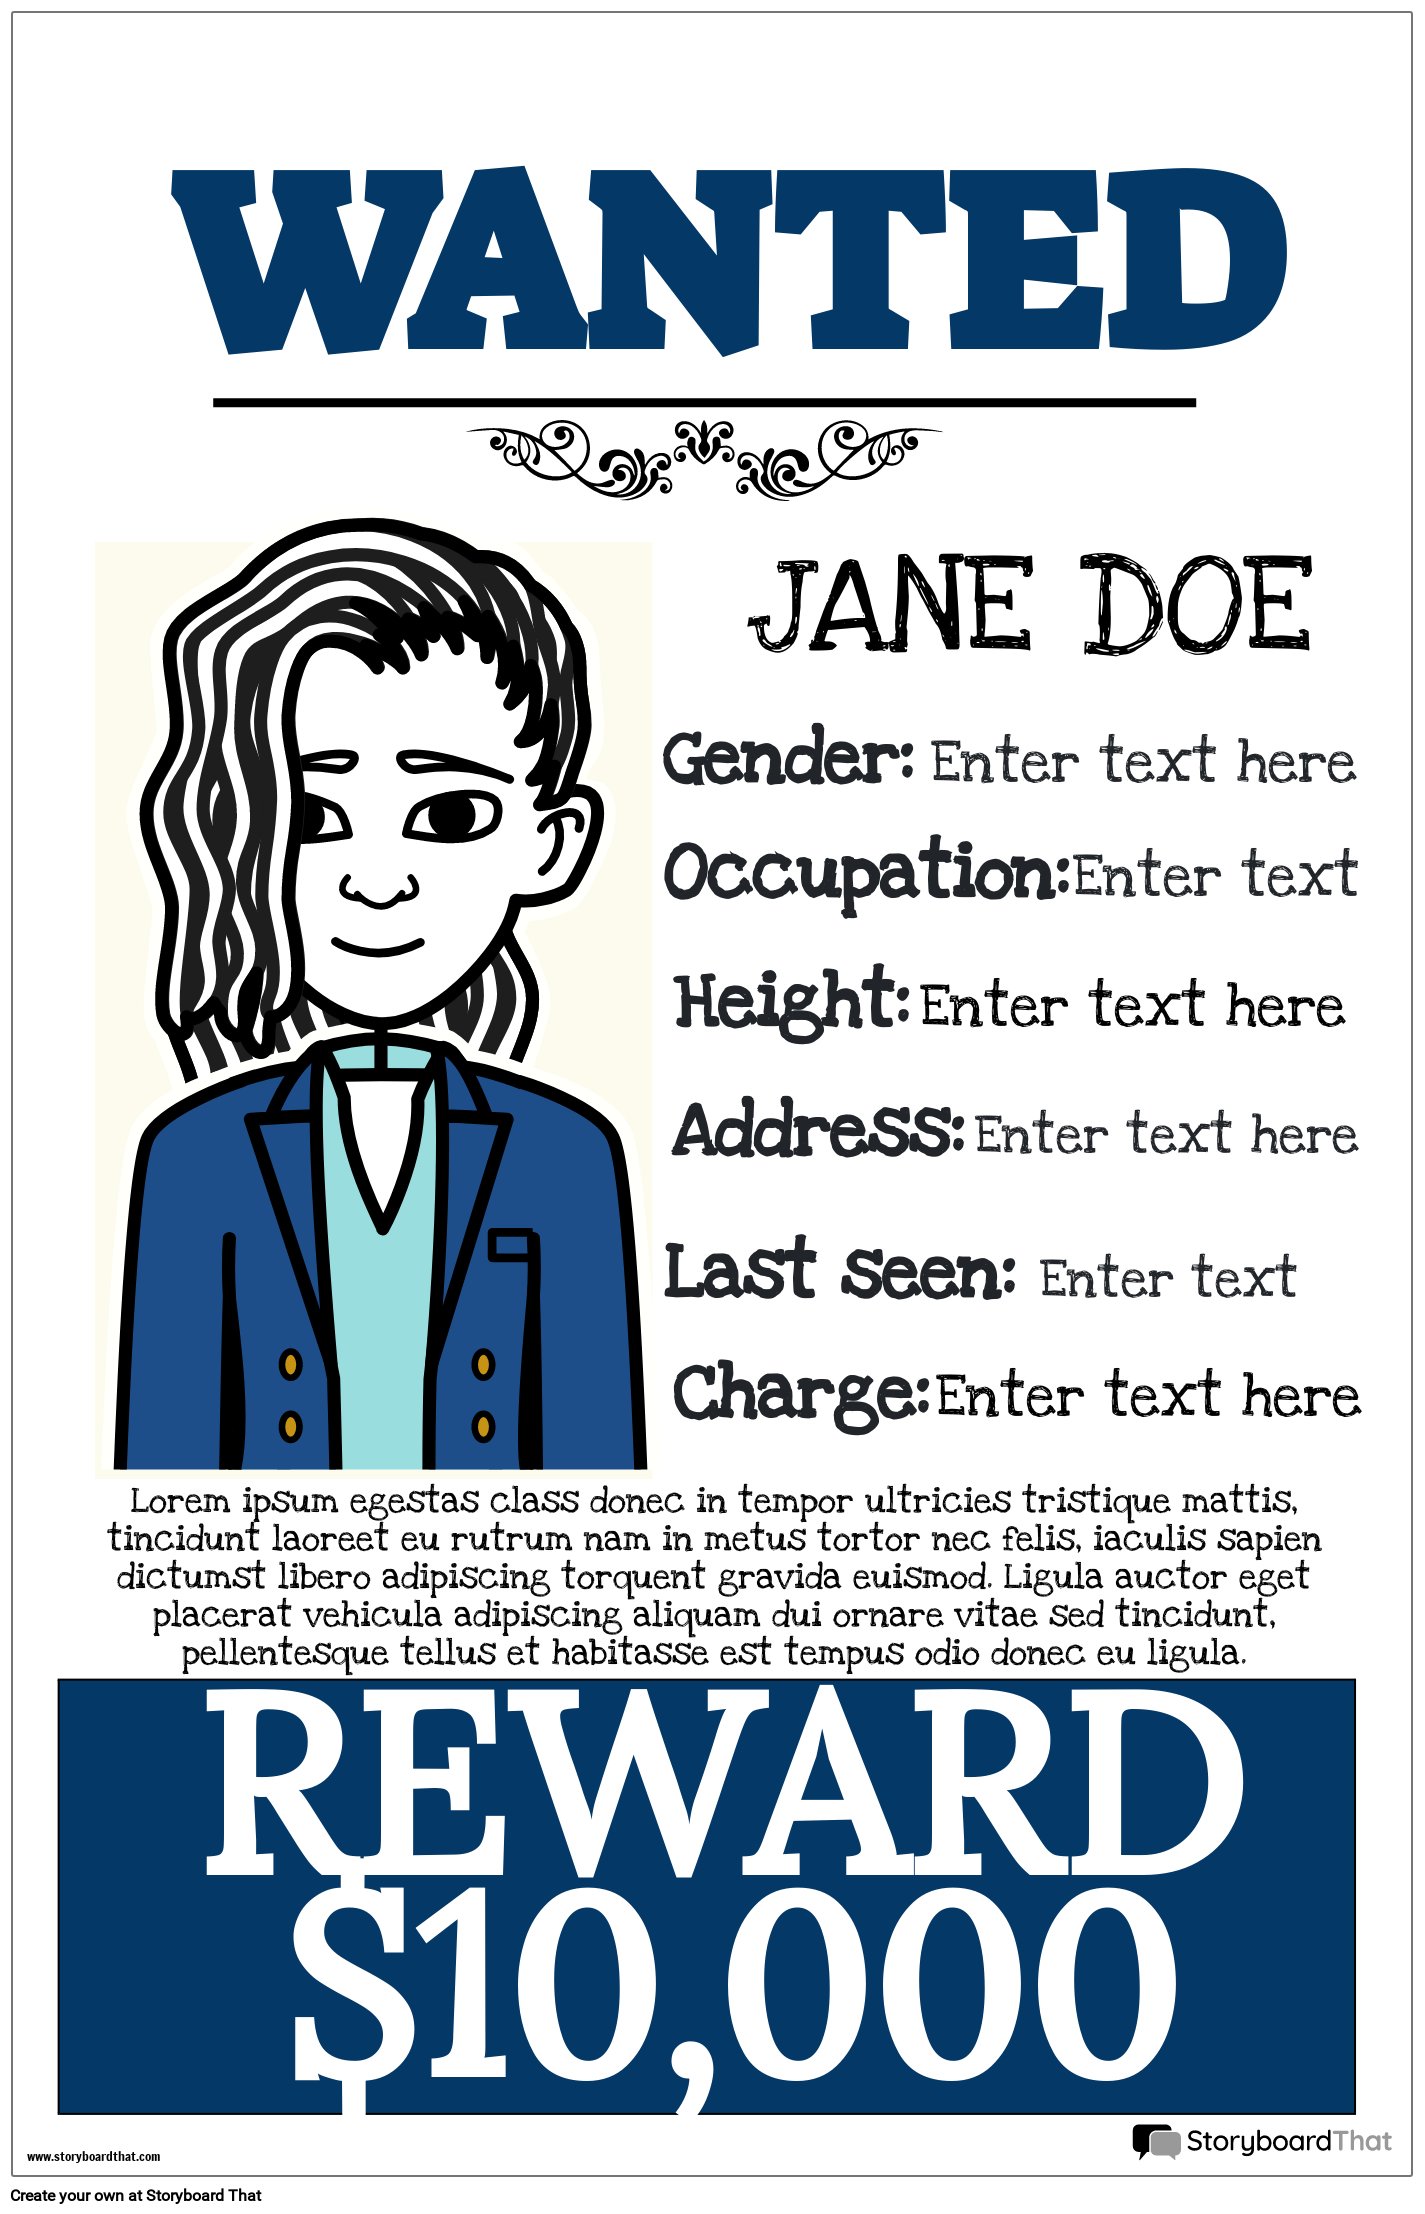 Wanted poster with details